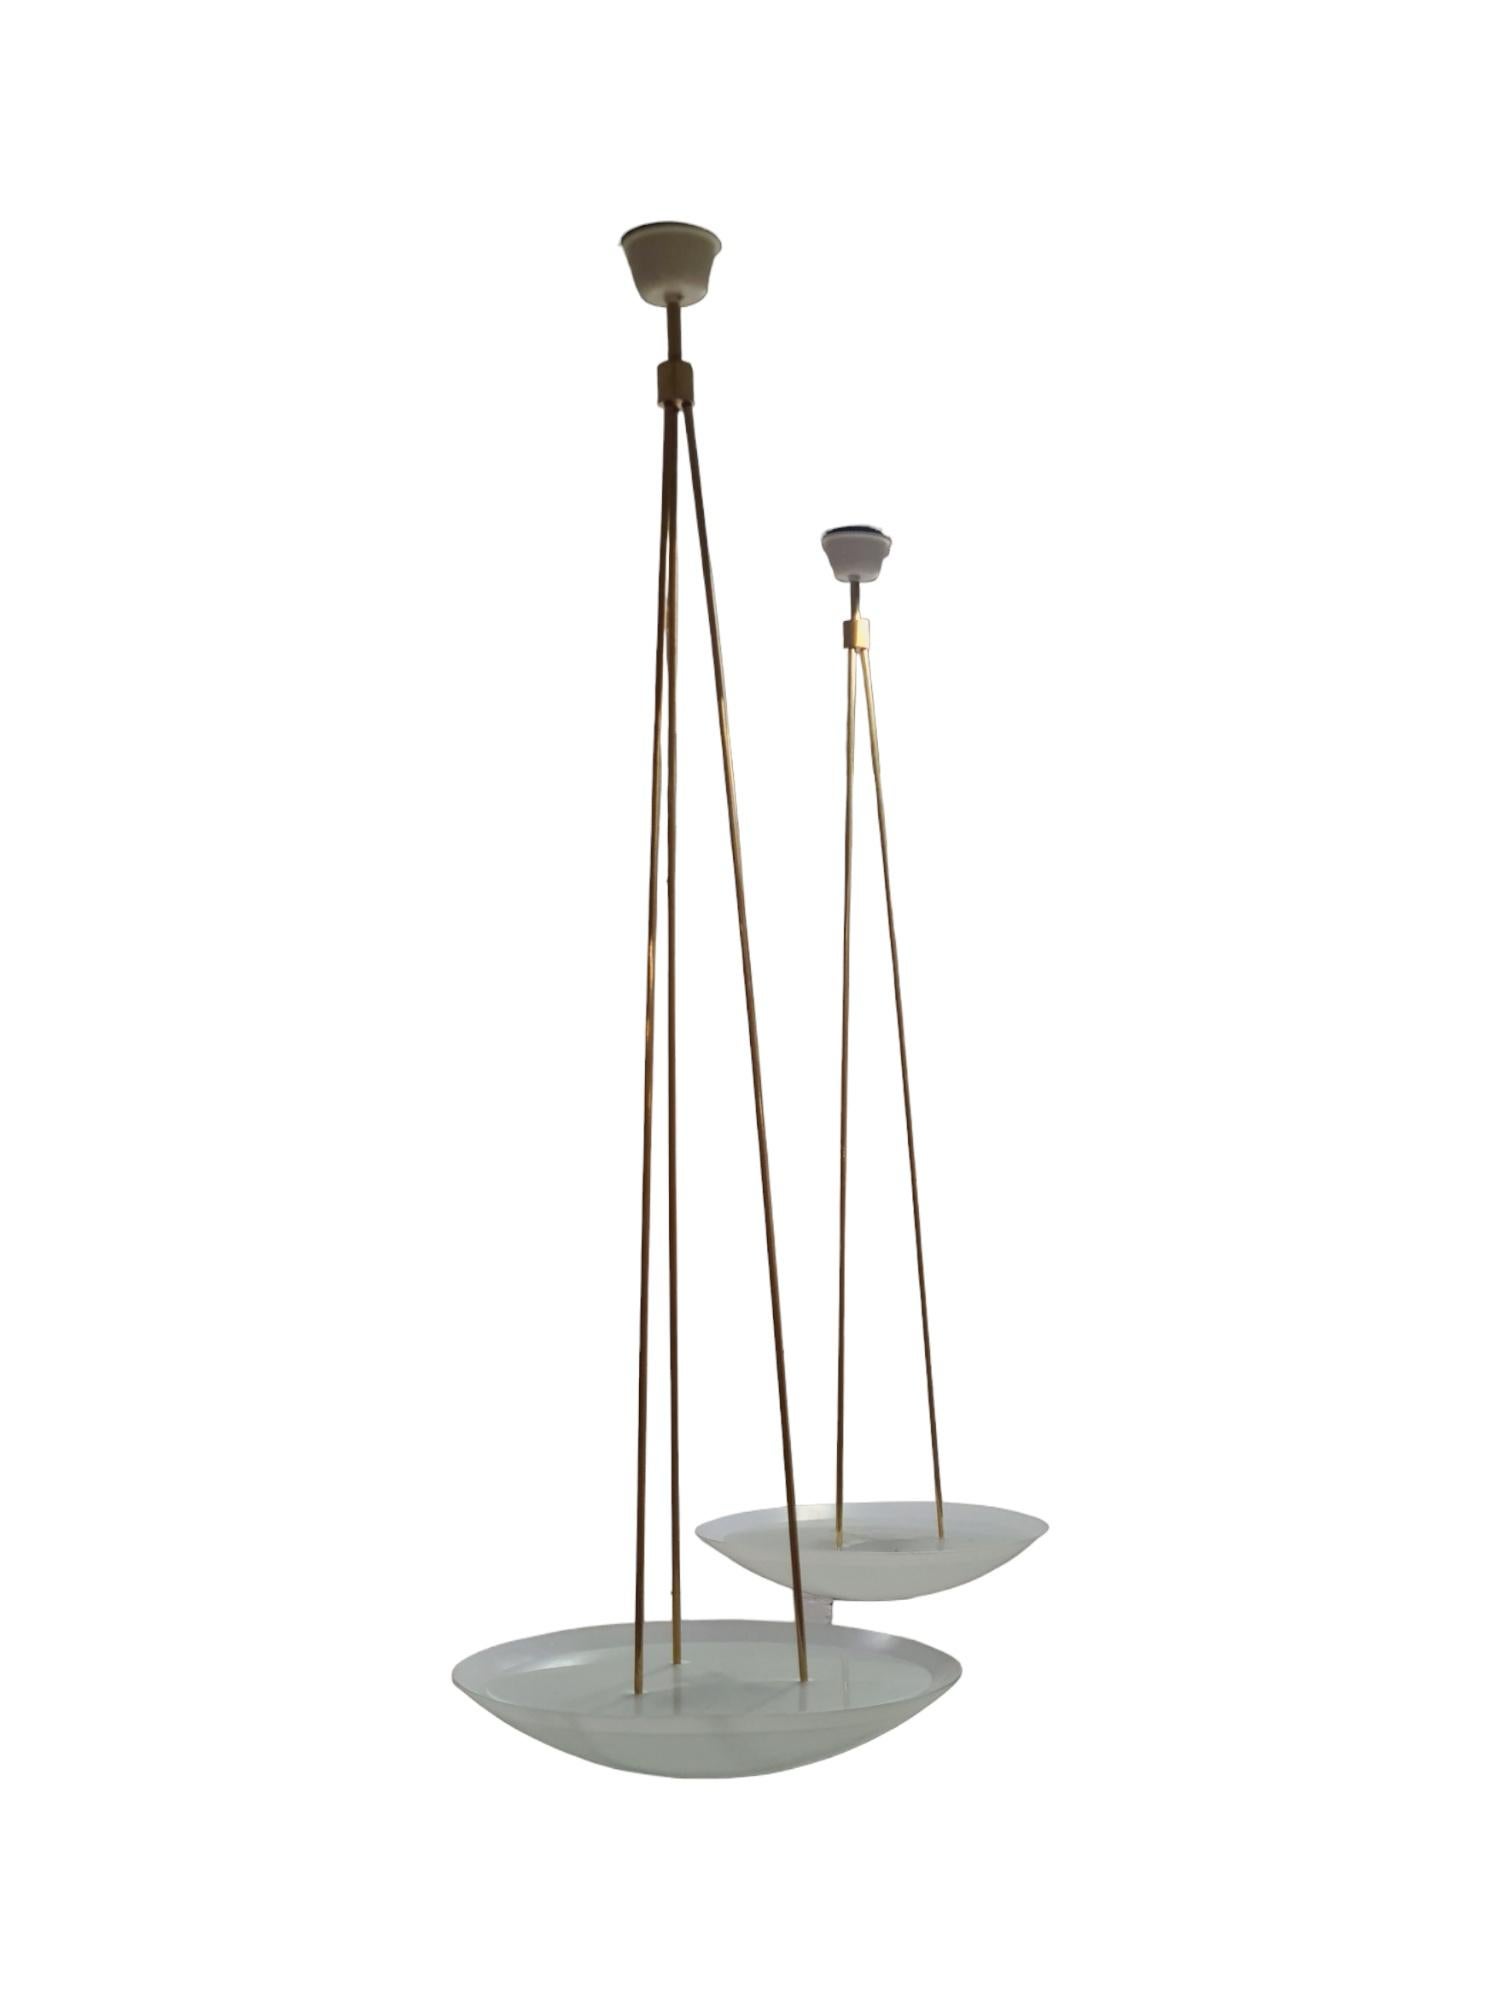 Scandinavian Modern Impressive 2m high Paavo Tynell ceiling lamps, Taito 1940s. For Sale